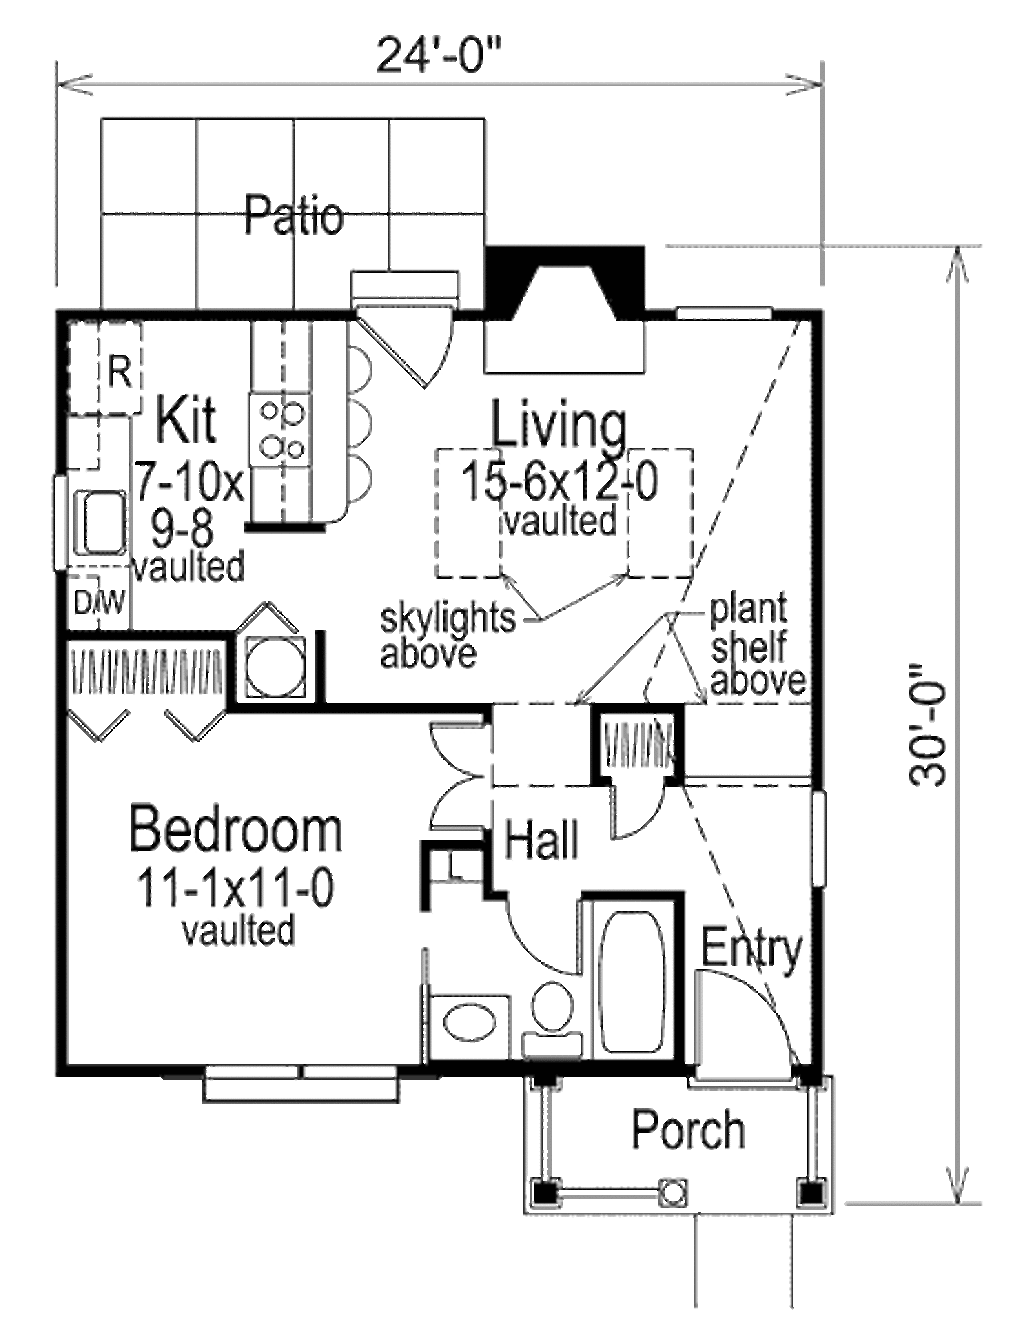 Plan clipart floor plan. Cottage style house beds